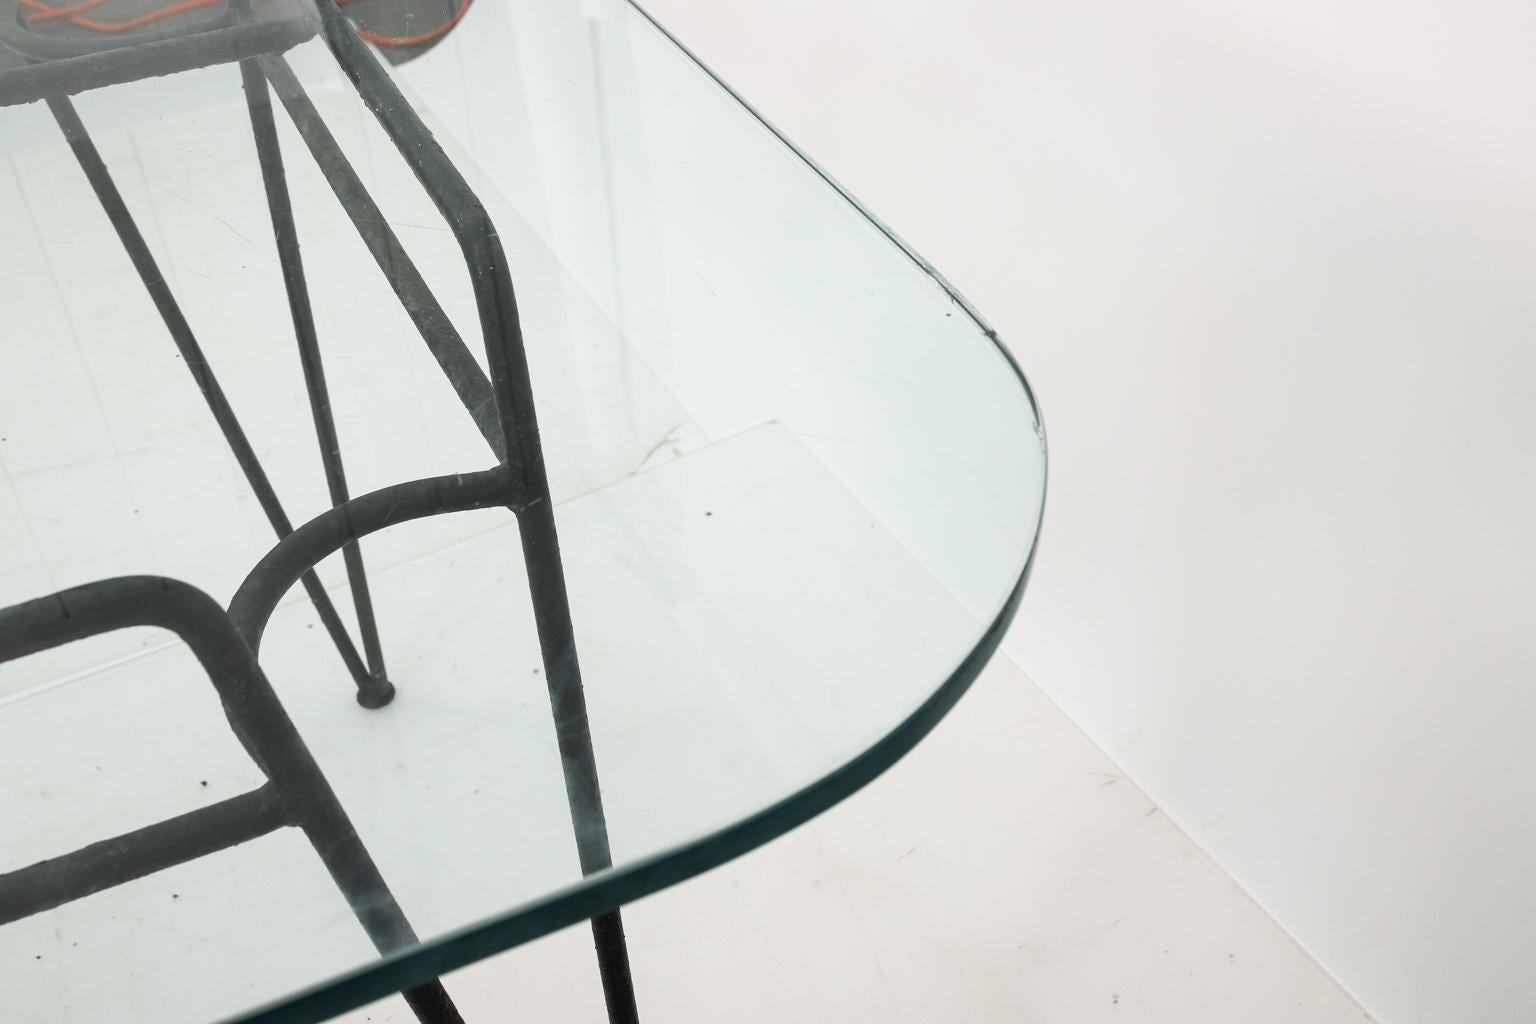 Glass top garden or outdoor dining table by Russell Woodard in the style of Sculptura with metal base. Please note of wear consistent with age.